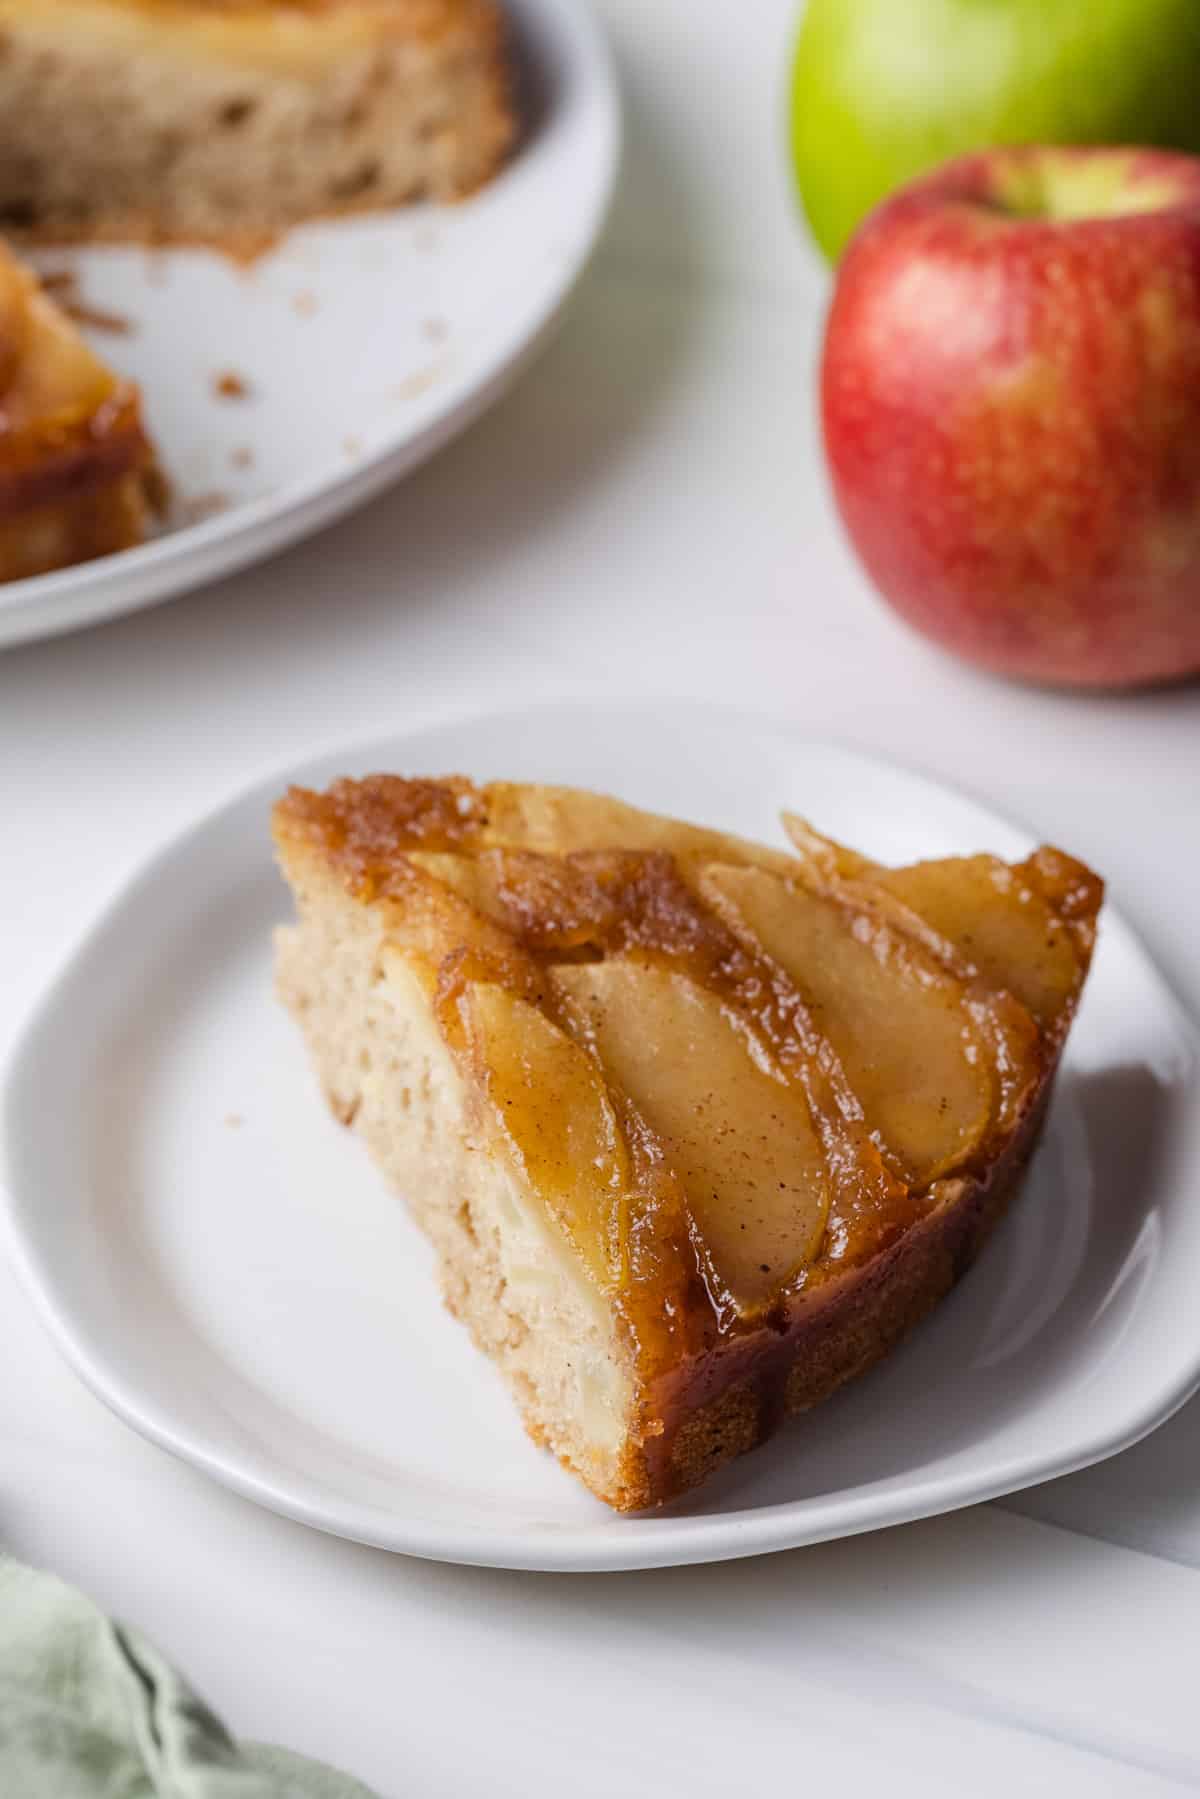 A slice of apple upside down cake on a plate